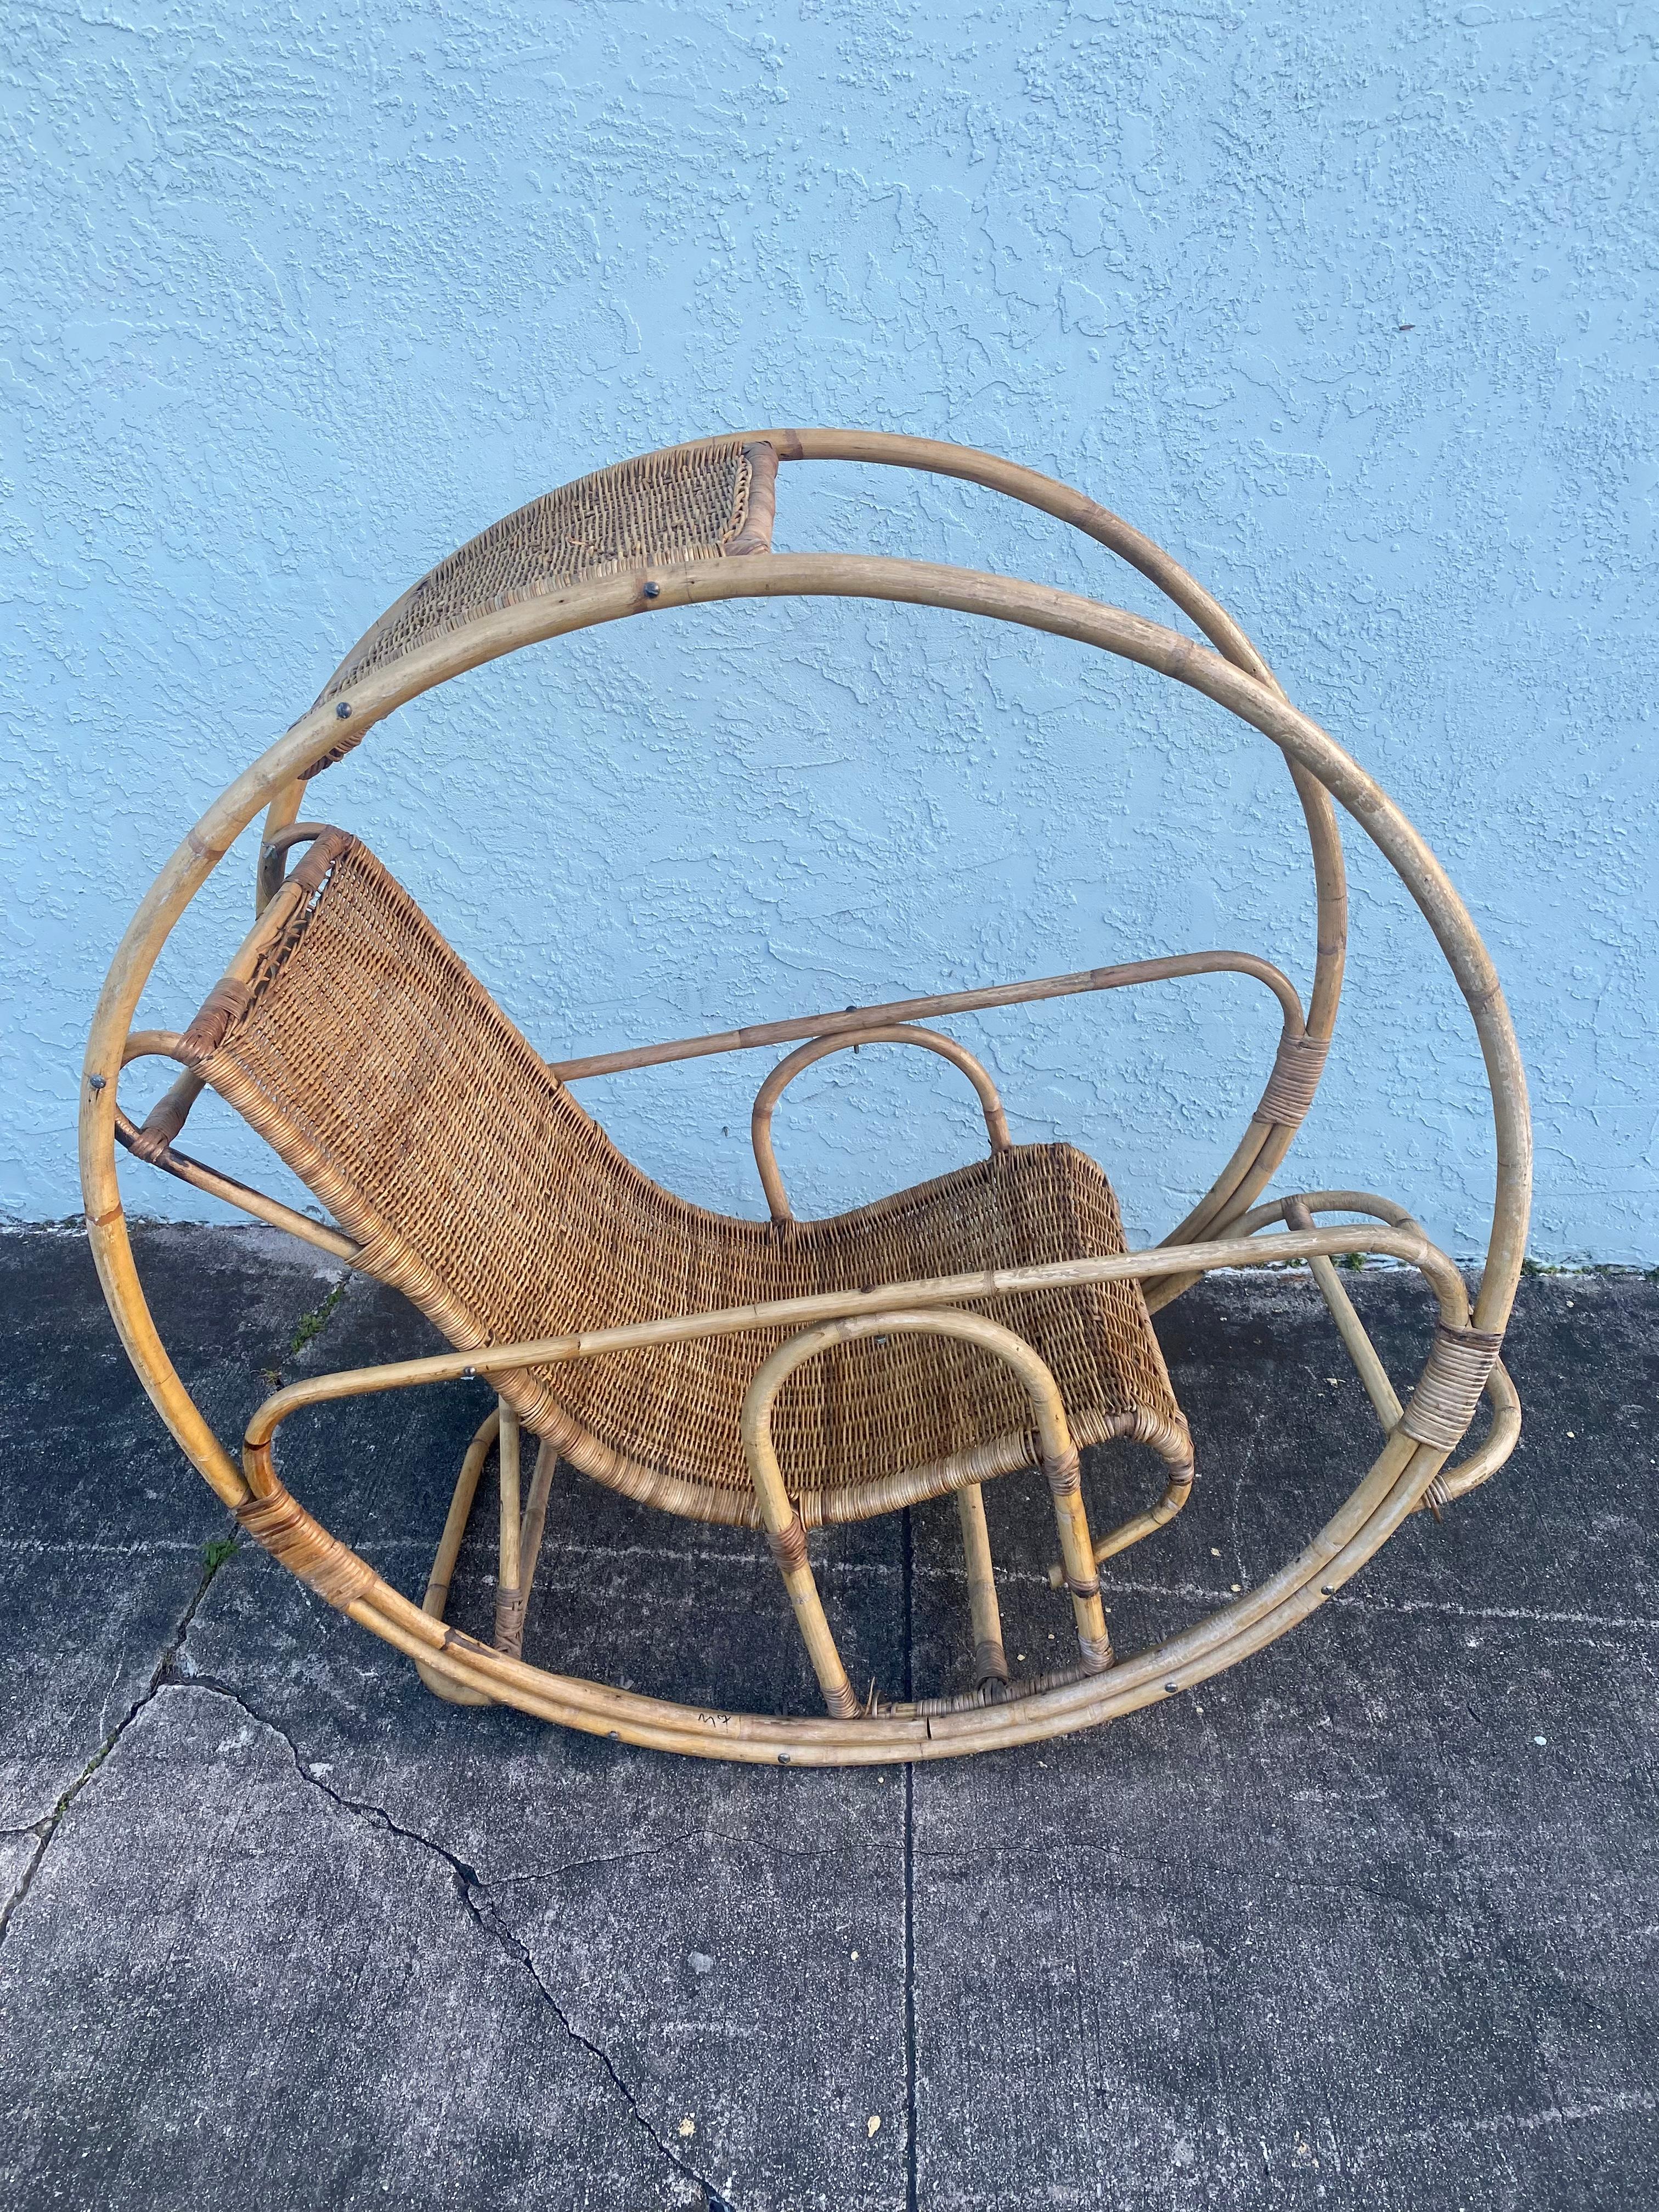 On offer on this occasion is one of the most stunning and rare rattan rocking chair you could hope to find. Outstanding design is exhibited throughout. The beautiful chair is statement piece and packed with personality!  Just look at the gorgeous